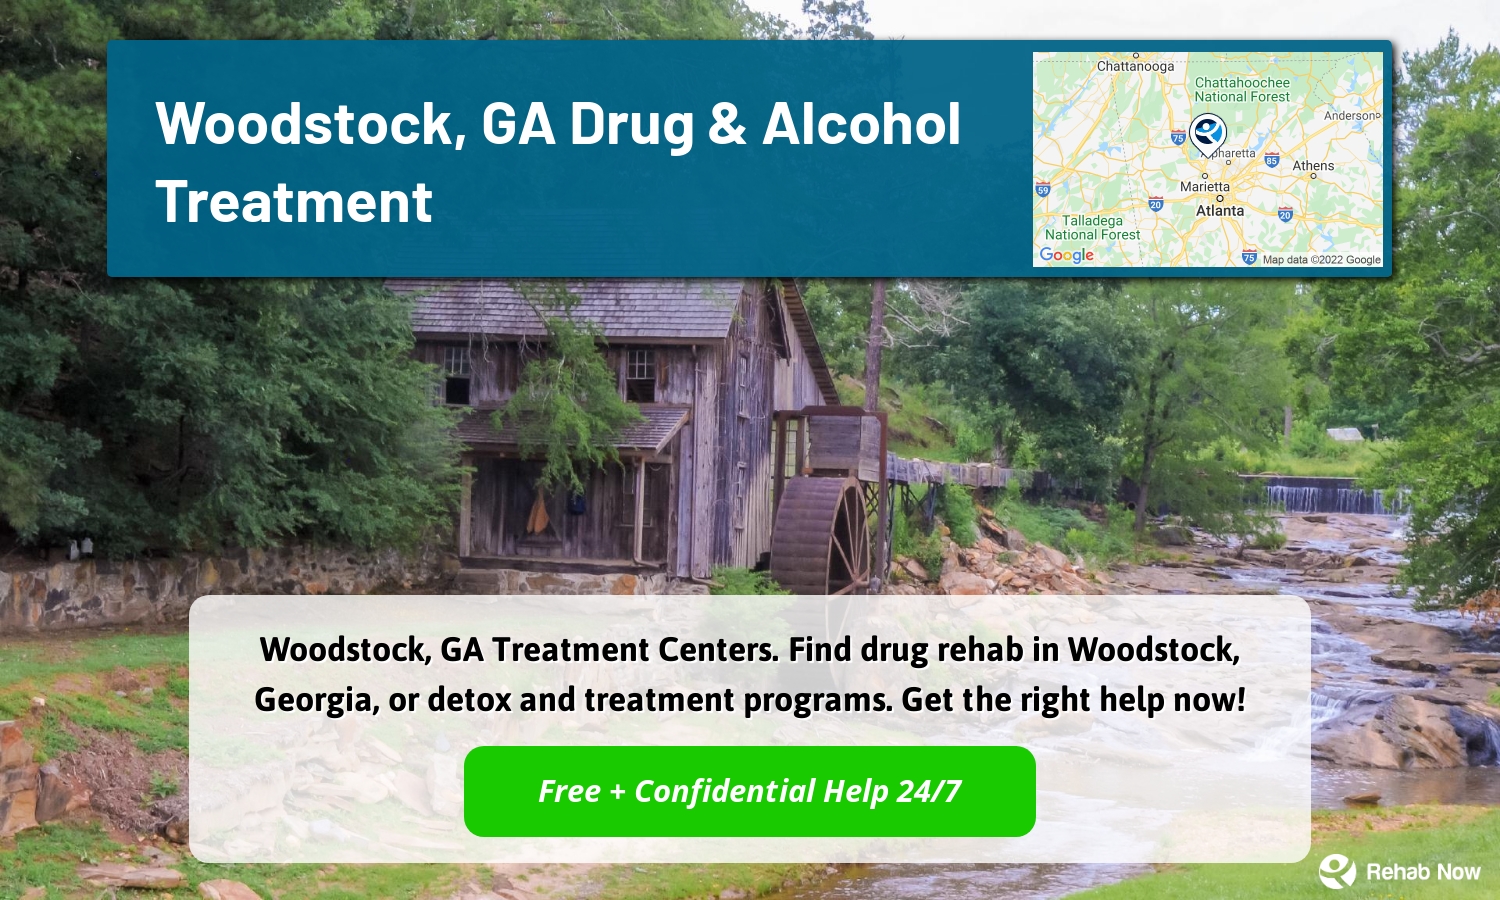 Woodstock, GA Treatment Centers. Find drug rehab in Woodstock, Georgia, or detox and treatment programs. Get the right help now!